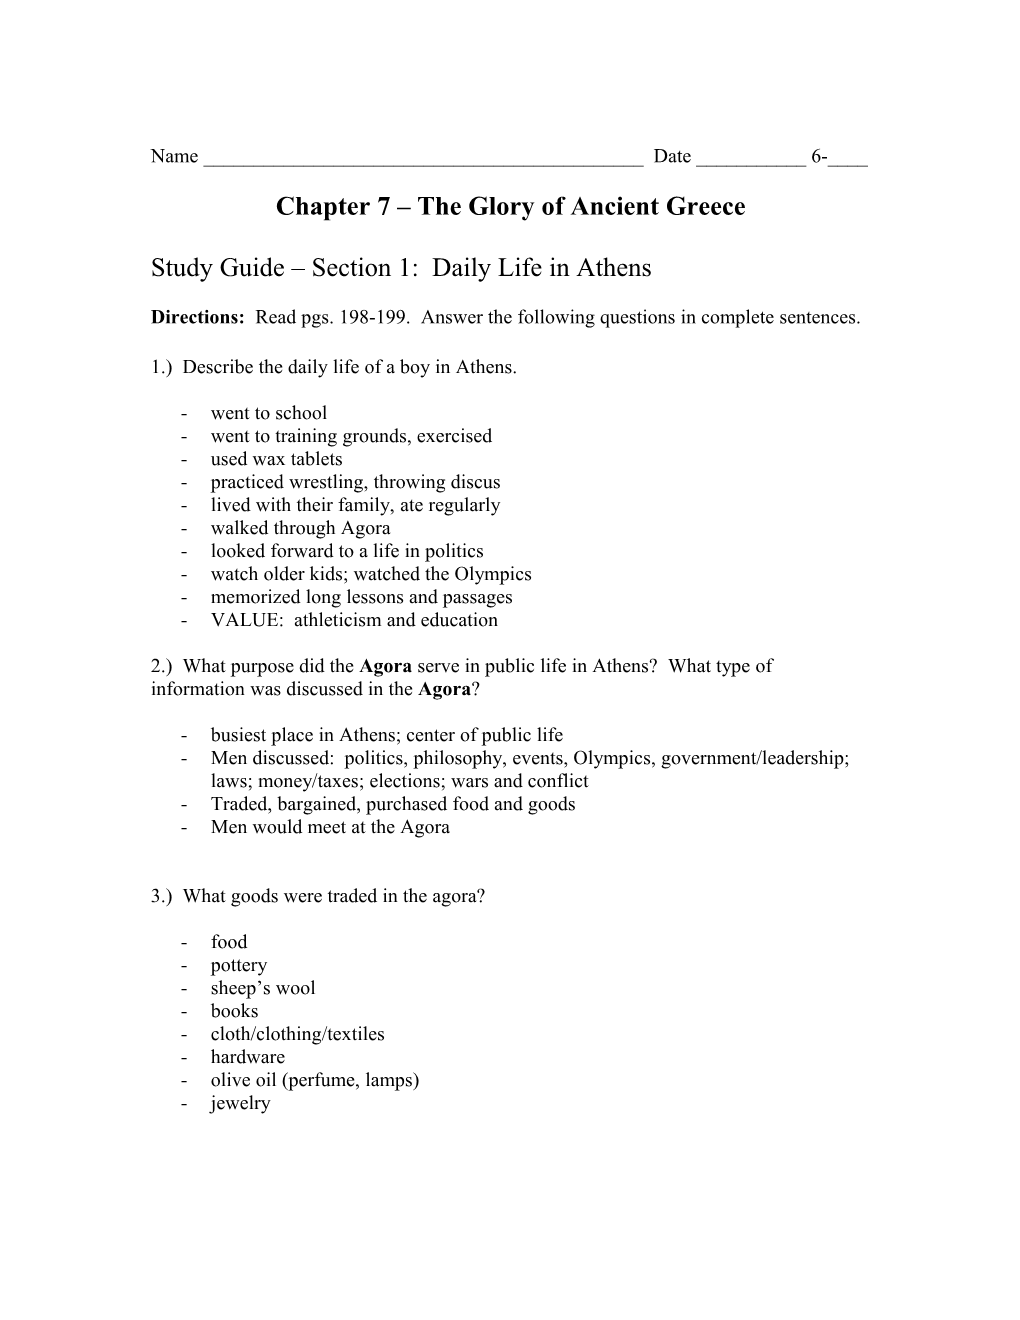 Chapter 7 the Glory of Ancient Greece